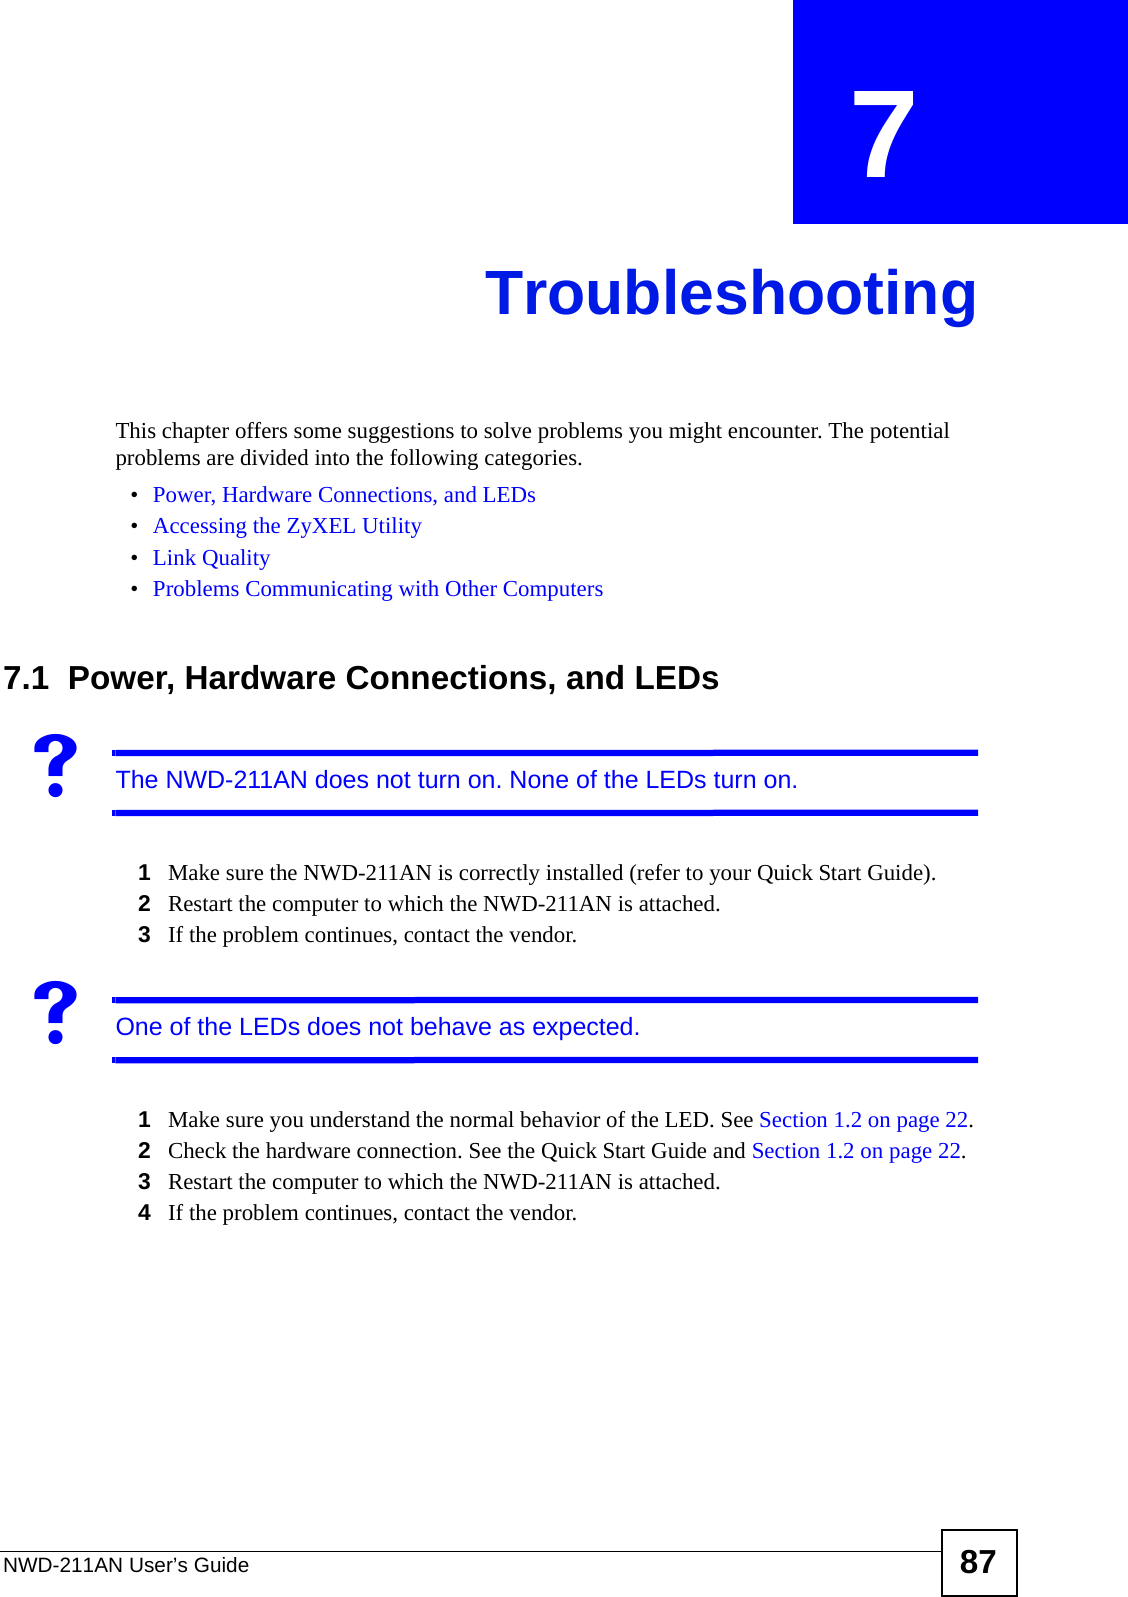 NWD-211AN User’s Guide 87CHAPTER  7 TroubleshootingThis chapter offers some suggestions to solve problems you might encounter. The potential problems are divided into the following categories. •Power, Hardware Connections, and LEDs•Accessing the ZyXEL Utility•Link Quality•Problems Communicating with Other Computers7.1  Power, Hardware Connections, and LEDsVThe NWD-211AN does not turn on. None of the LEDs turn on.1Make sure the NWD-211AN is correctly installed (refer to your Quick Start Guide).2Restart the computer to which the NWD-211AN is attached.3If the problem continues, contact the vendor.VOne of the LEDs does not behave as expected.1Make sure you understand the normal behavior of the LED. See Section 1.2 on page 22.2Check the hardware connection. See the Quick Start Guide and Section 1.2 on page 22. 3Restart the computer to which the NWD-211AN is attached.4If the problem continues, contact the vendor.